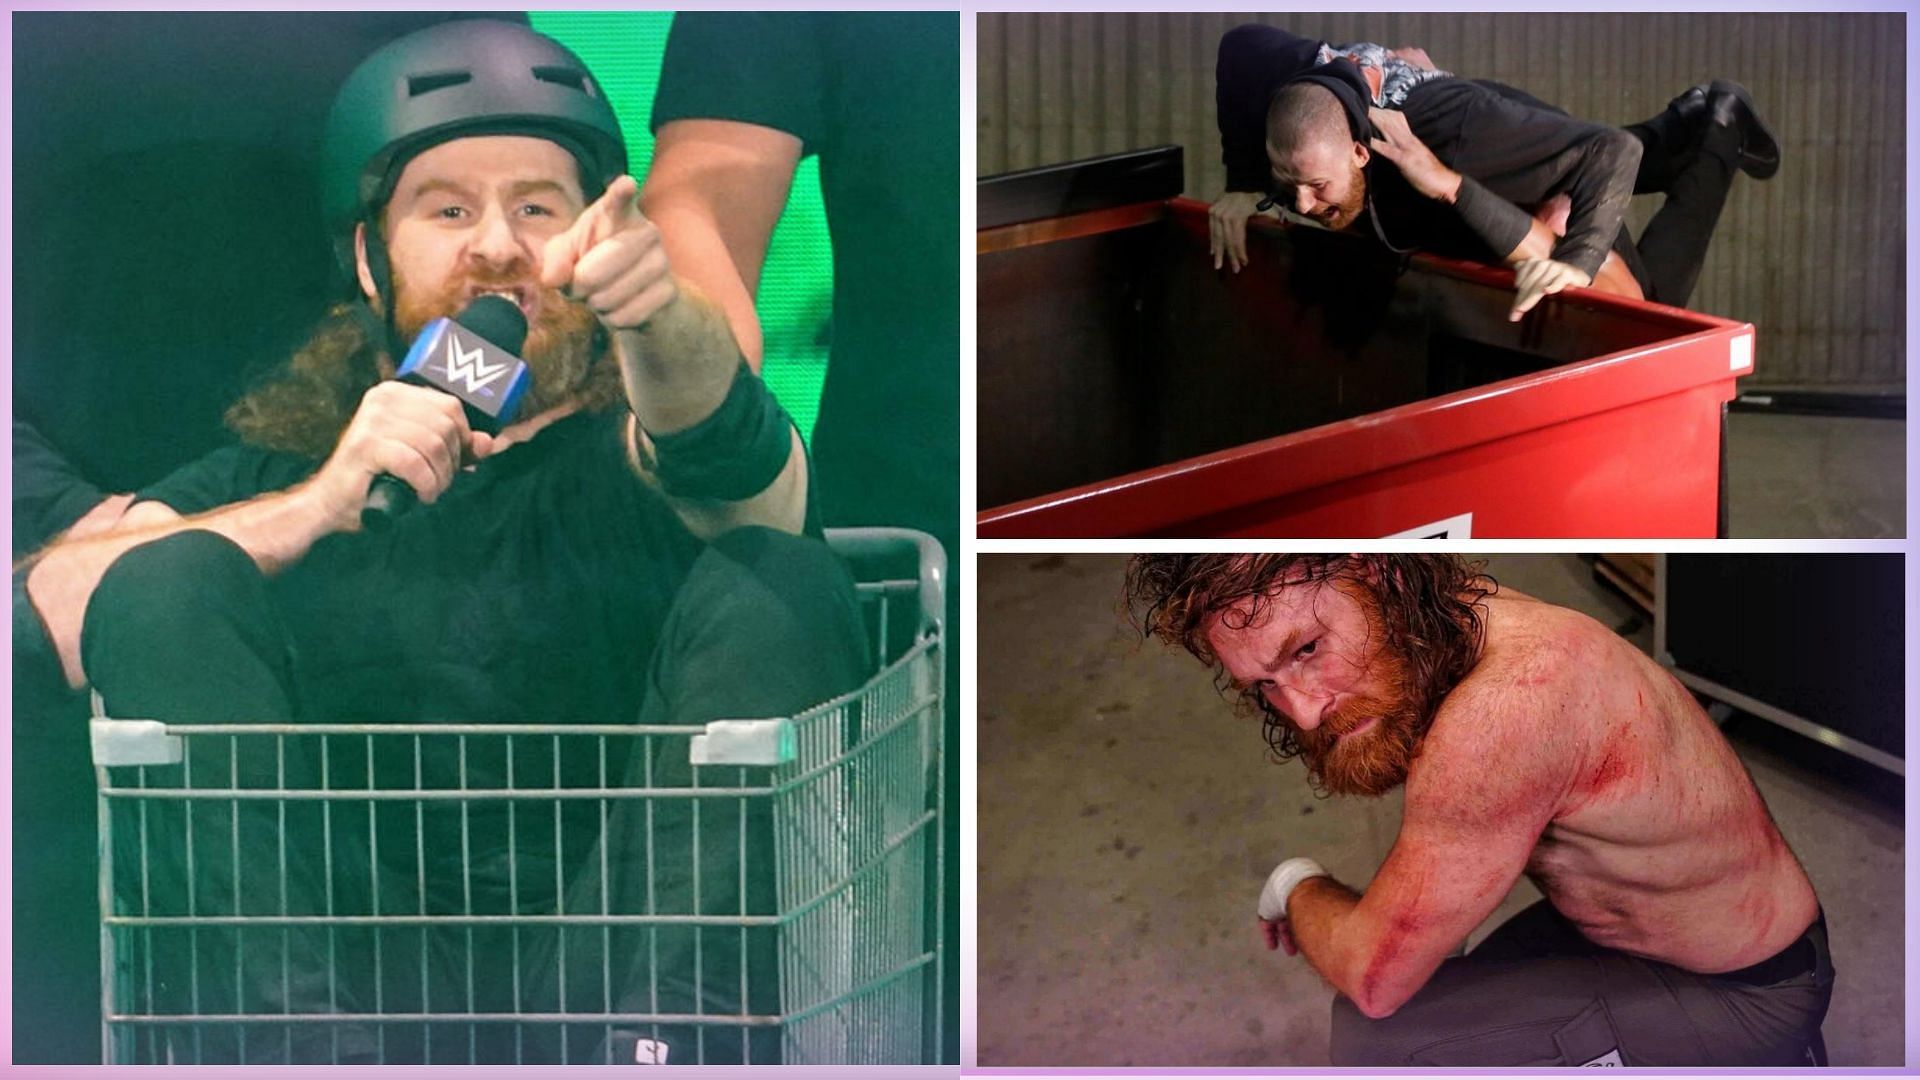 Sami Zayn is a member of The Bloodline faction.